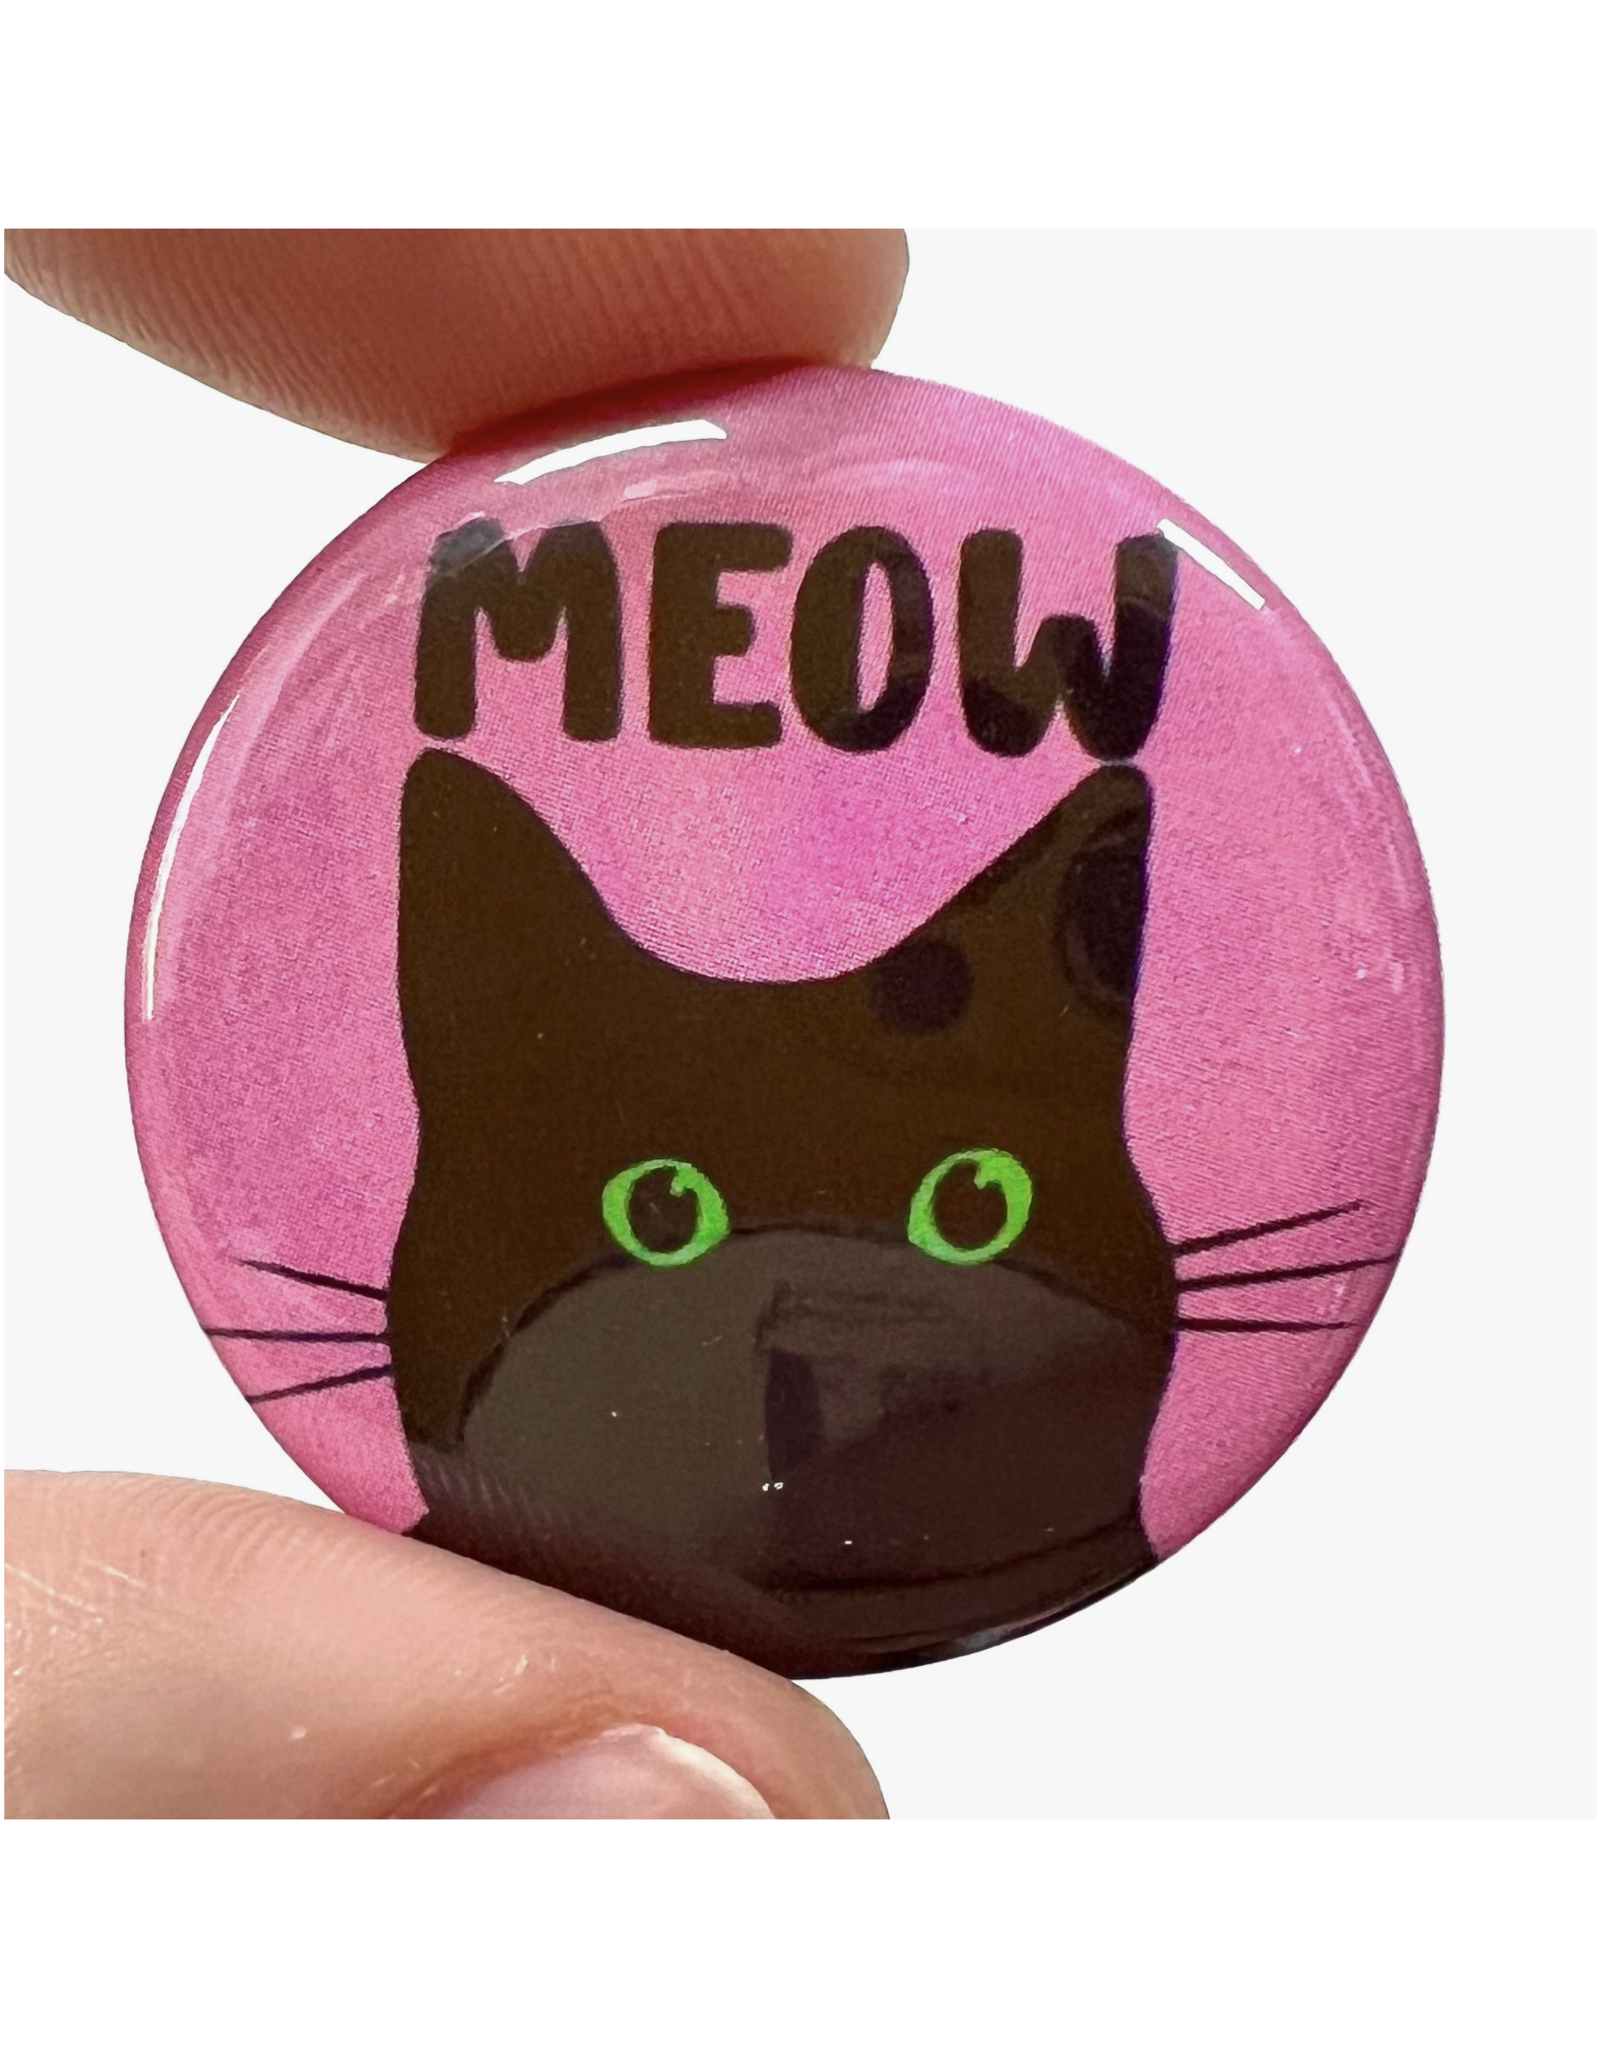 Meow Black Cat Pink Button